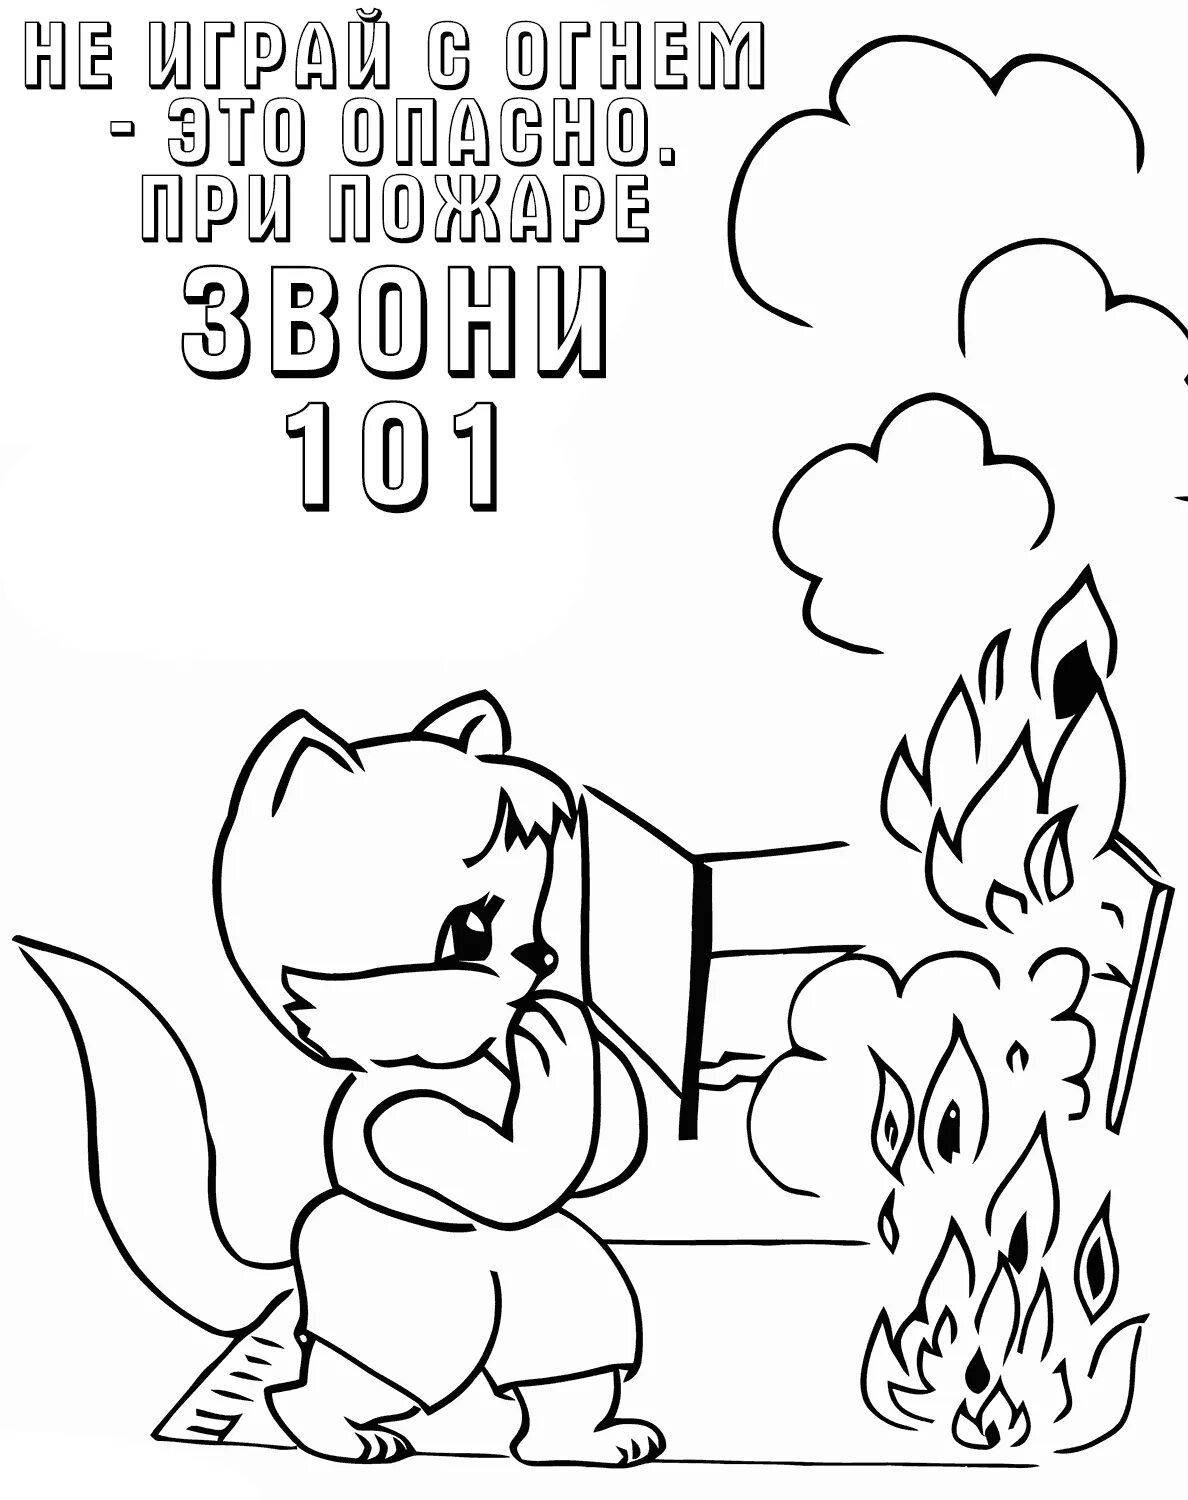 Fun Fire Safety Coloring Book for 4-5 year olds